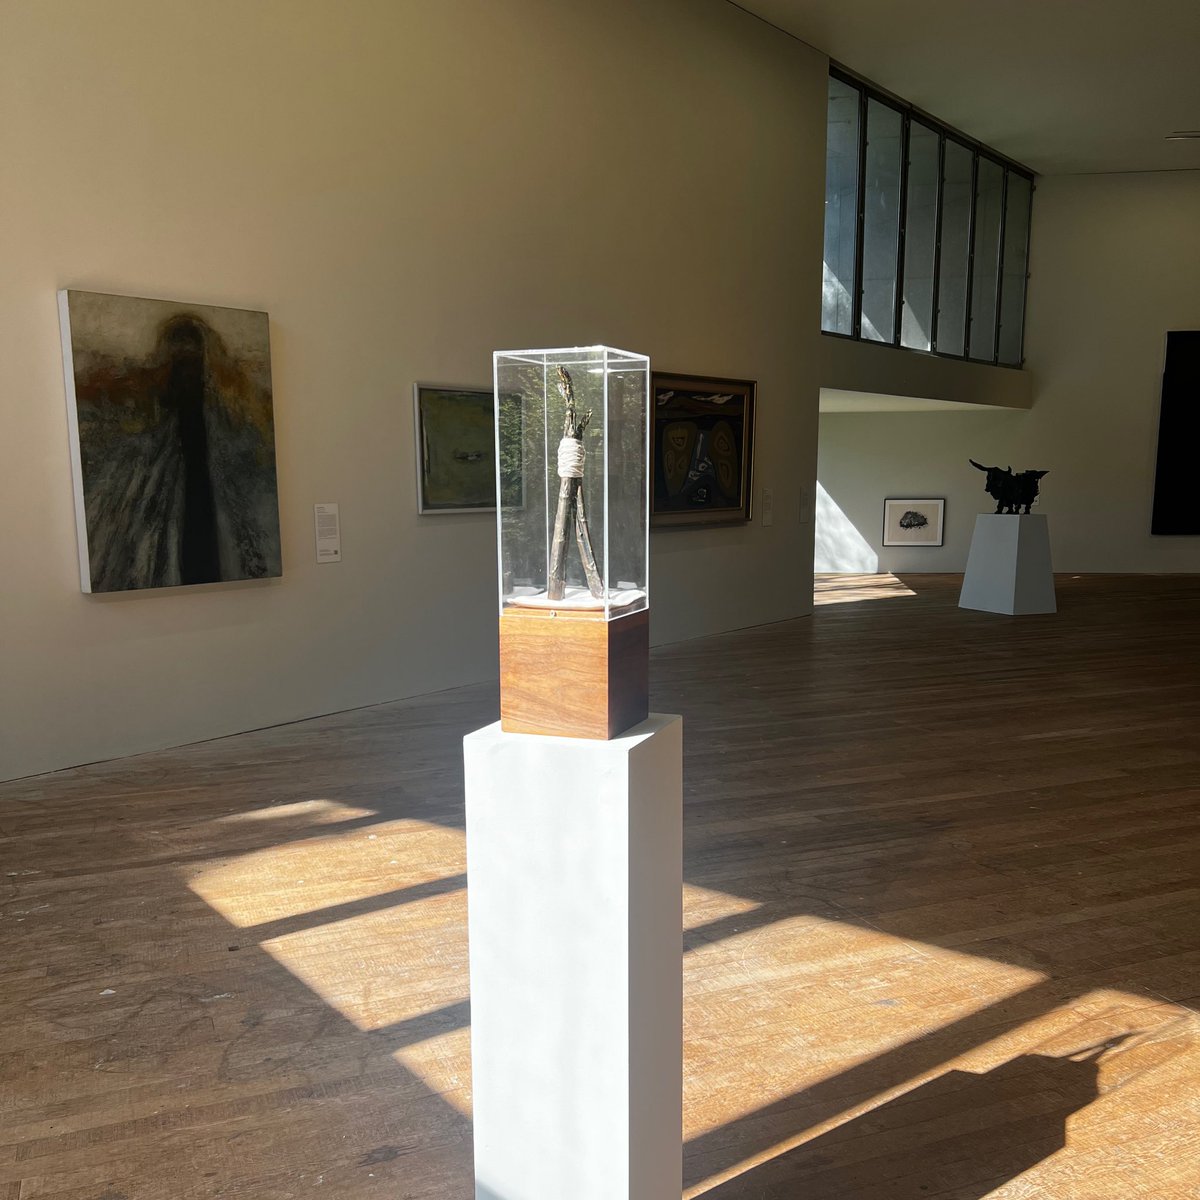 Our current exhibition Groundwork hosts work from a wide range of artists in our UCC art collection. Groundwork focuses on environmental observations and concerns 🌾🌳 You can find out more about this exhibition by visiting our website: glucksman.org/exhibitions/gr…